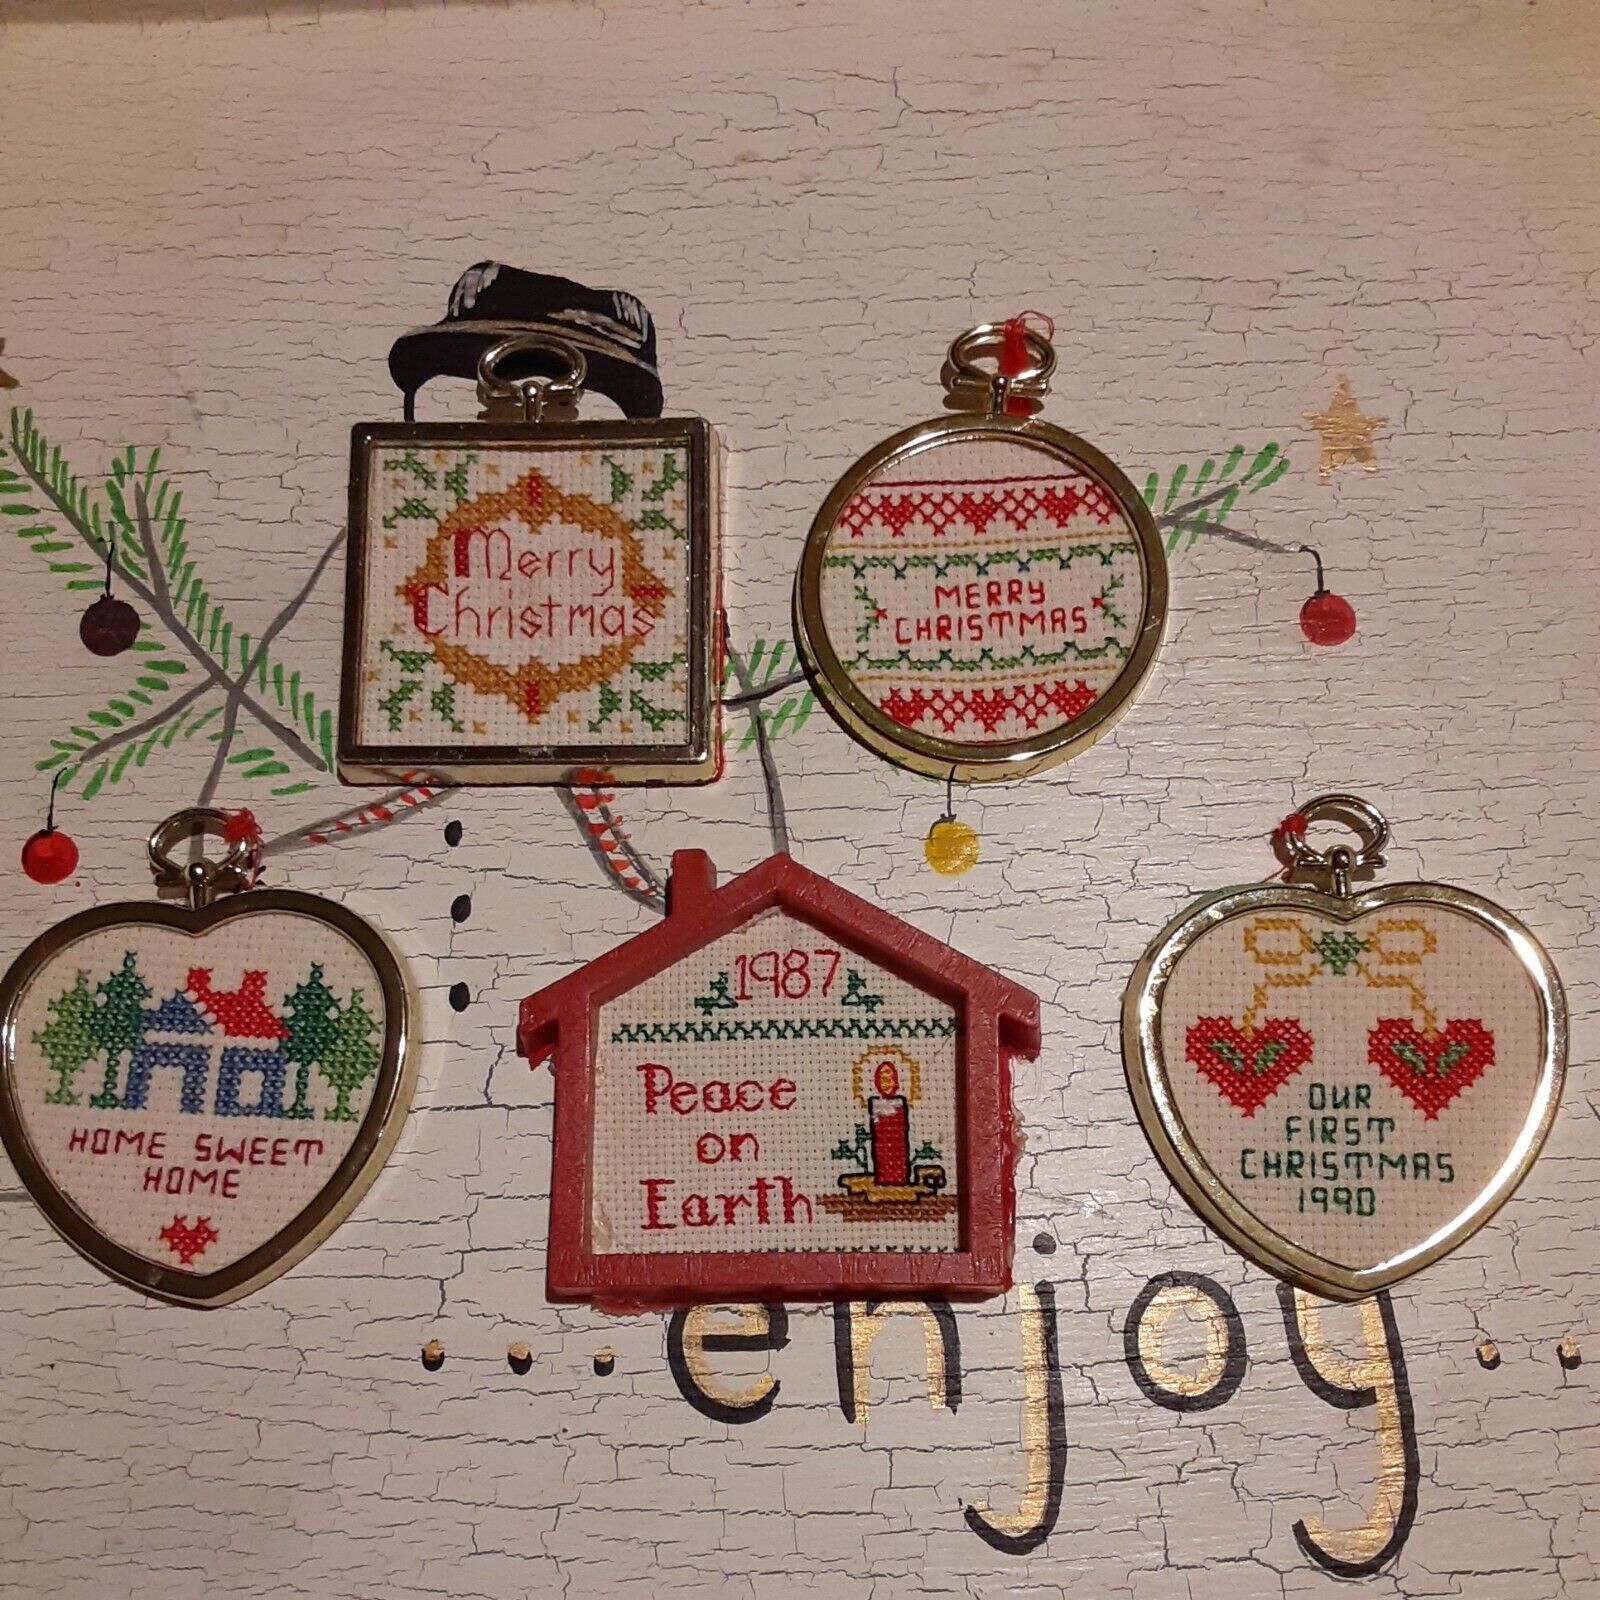 Vintage Homemade Cross stitch Embroidered Christmas Ornaments lot of 5